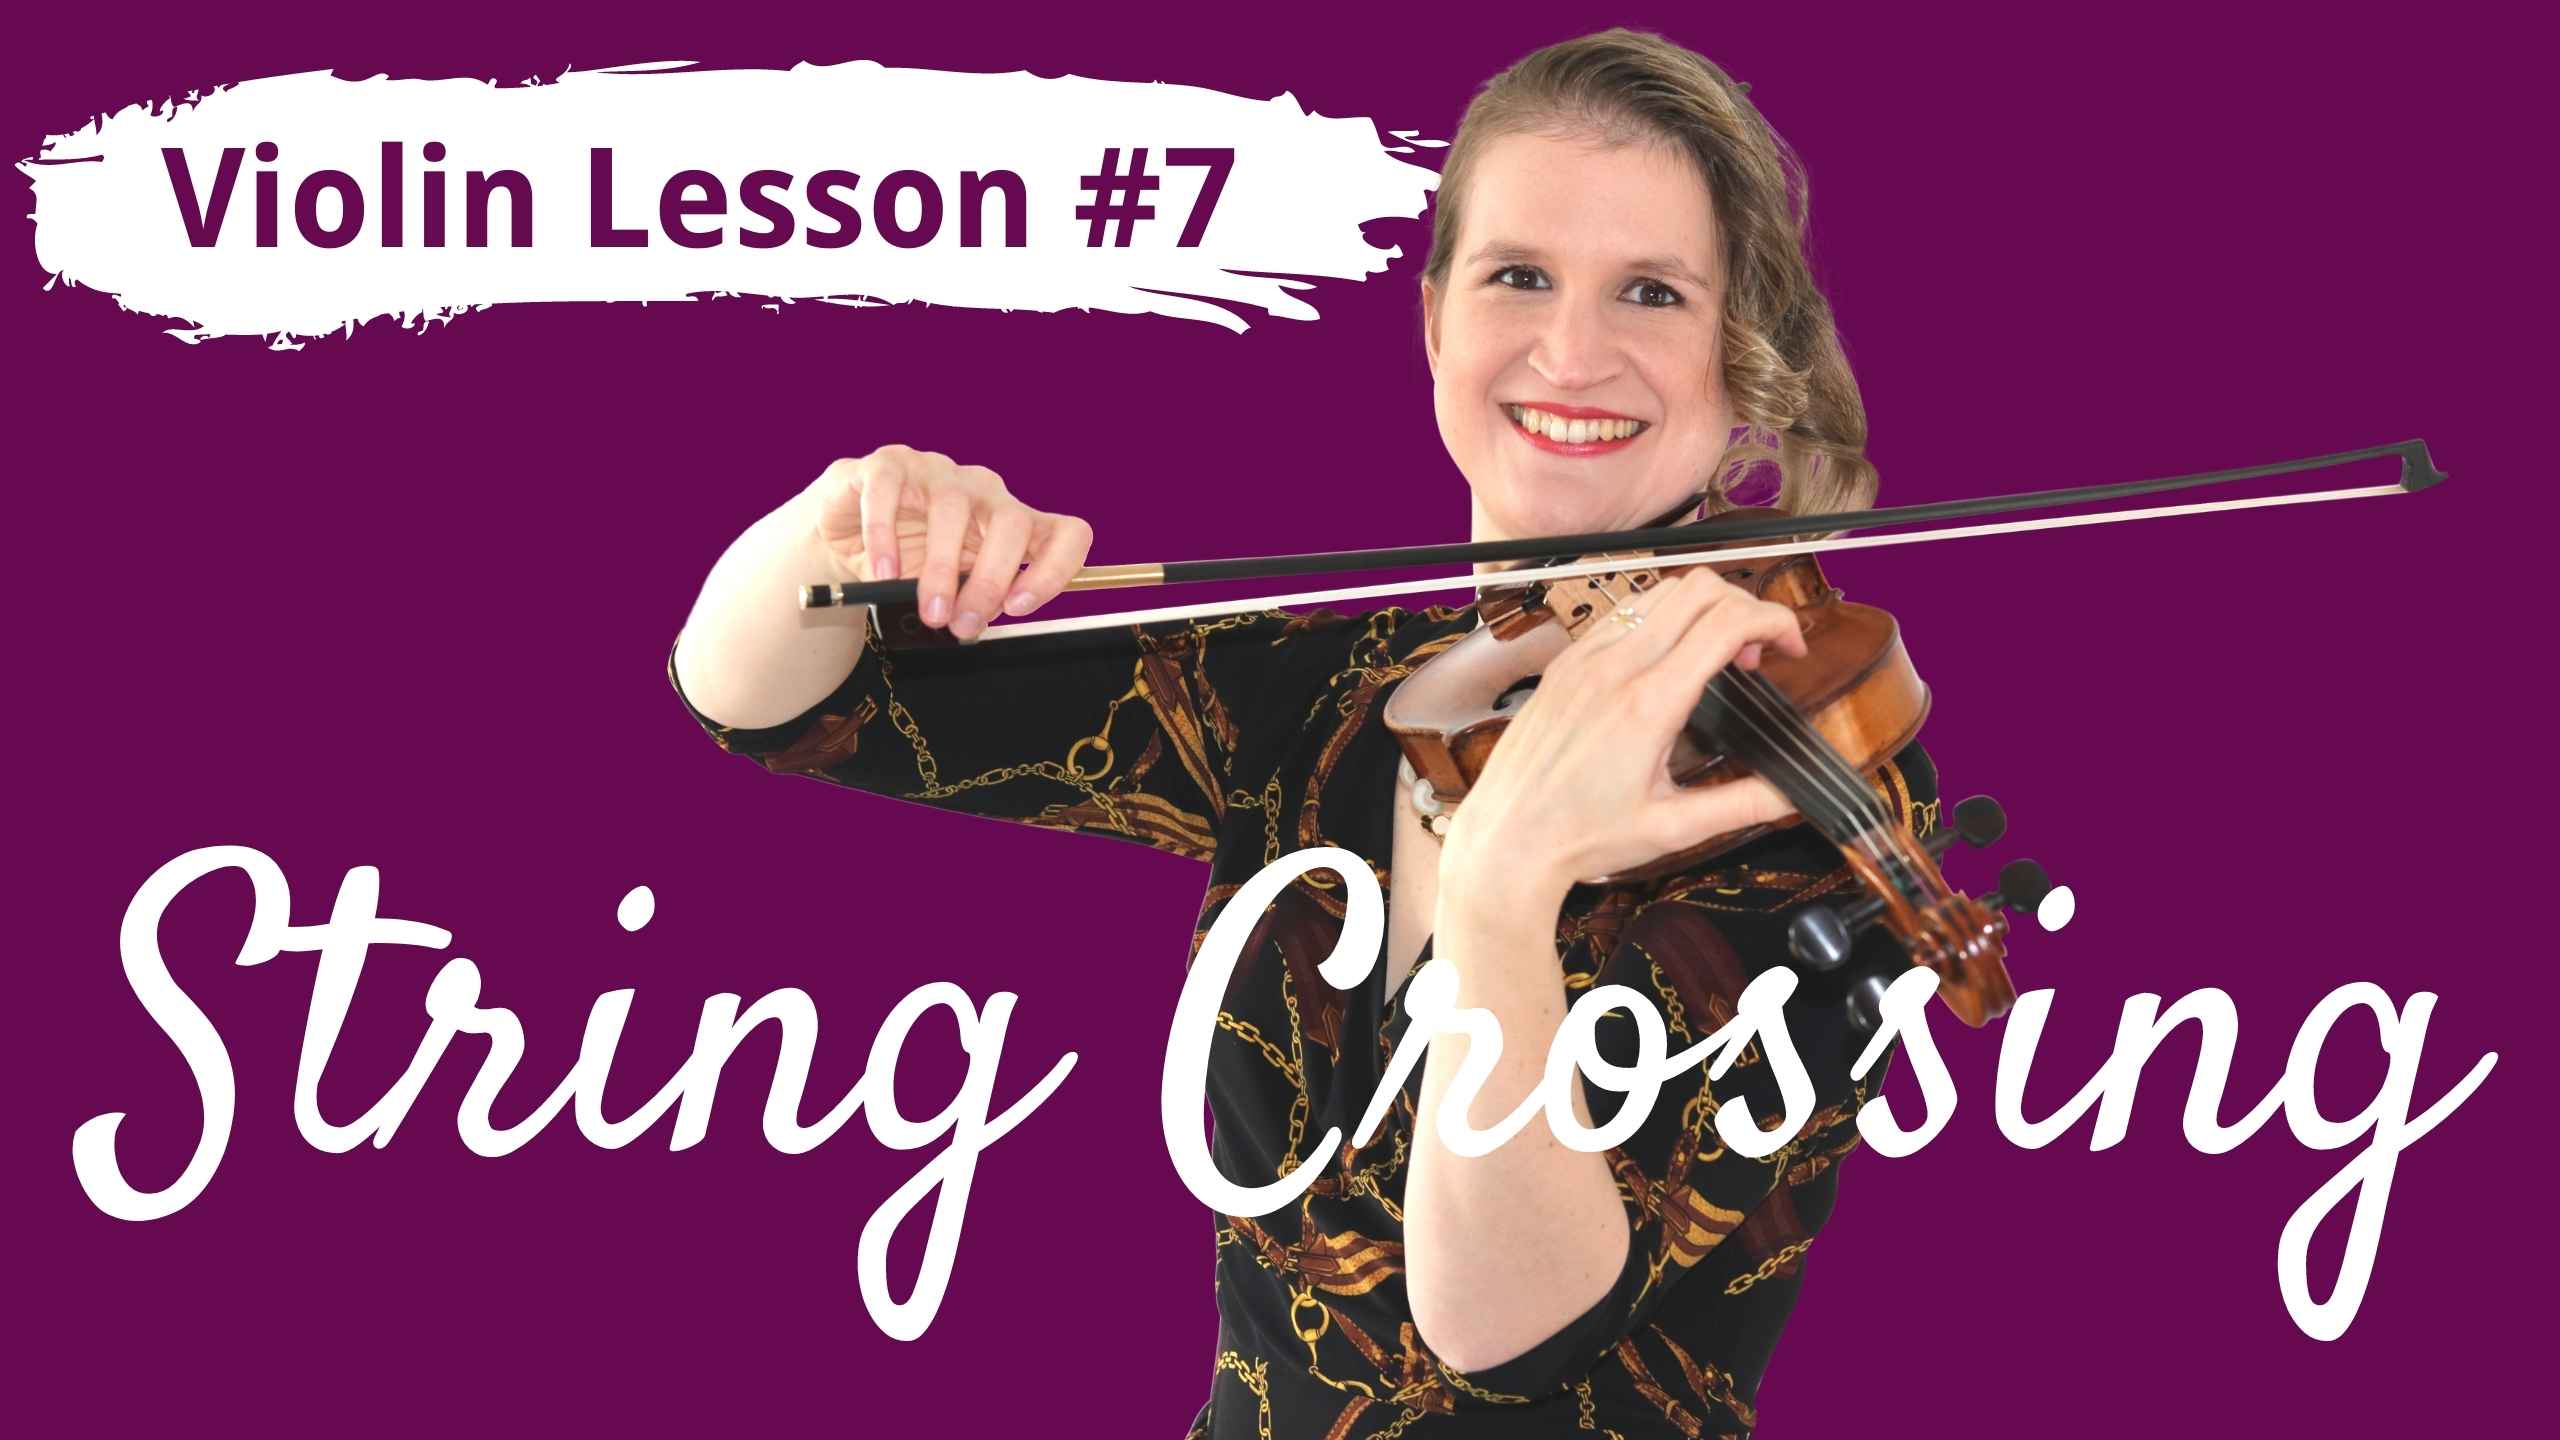 free-violin-lesson-7-for-beginners-string-crossing-violin-lounge